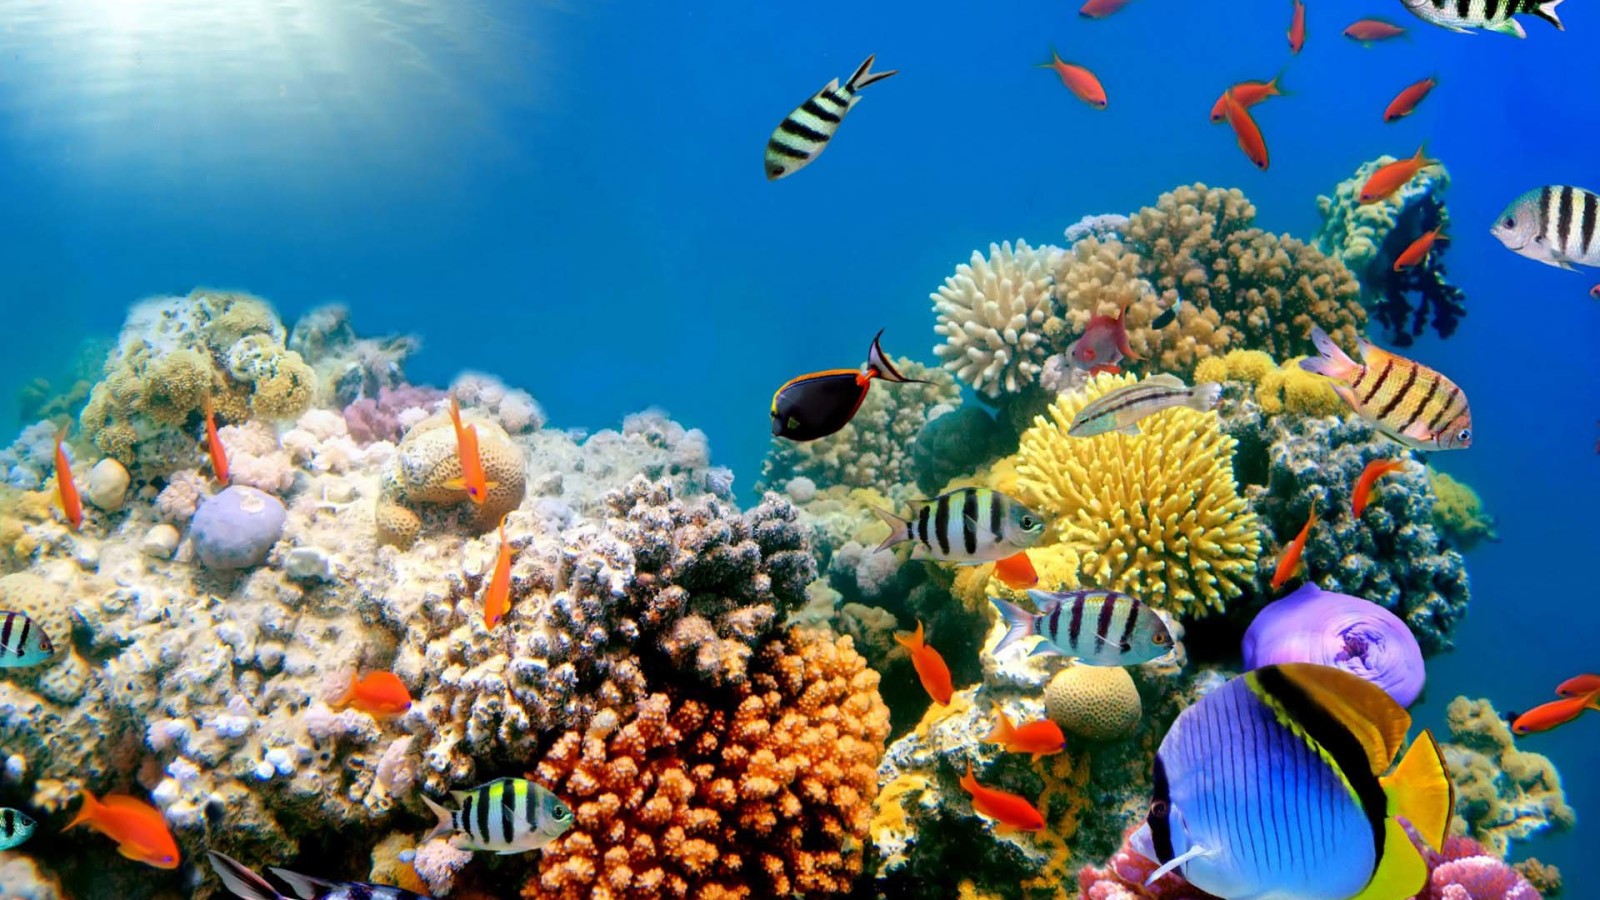 Coral Reef Wallpapers - thefreakypics.com | thefreakypics.com